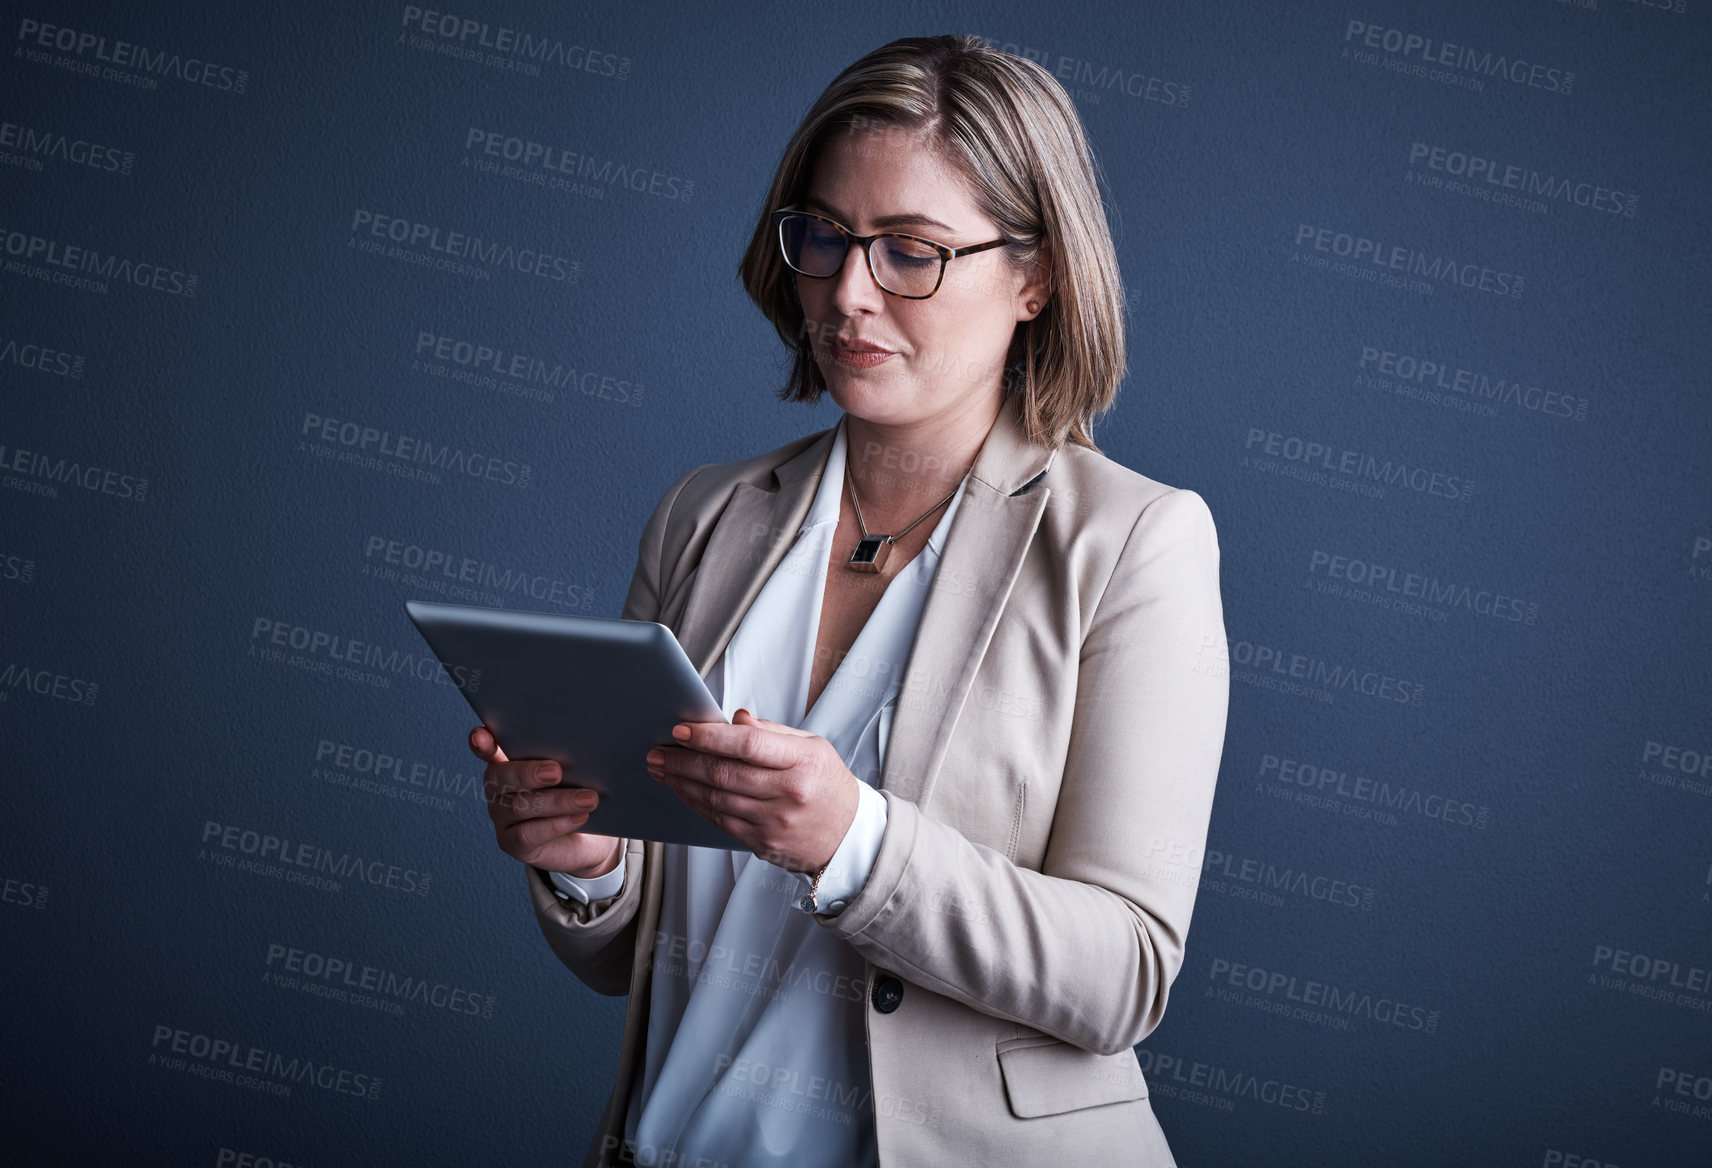 Buy stock photo Studio shot of an attractive young corporate businesswoman using a tablet against a dark background